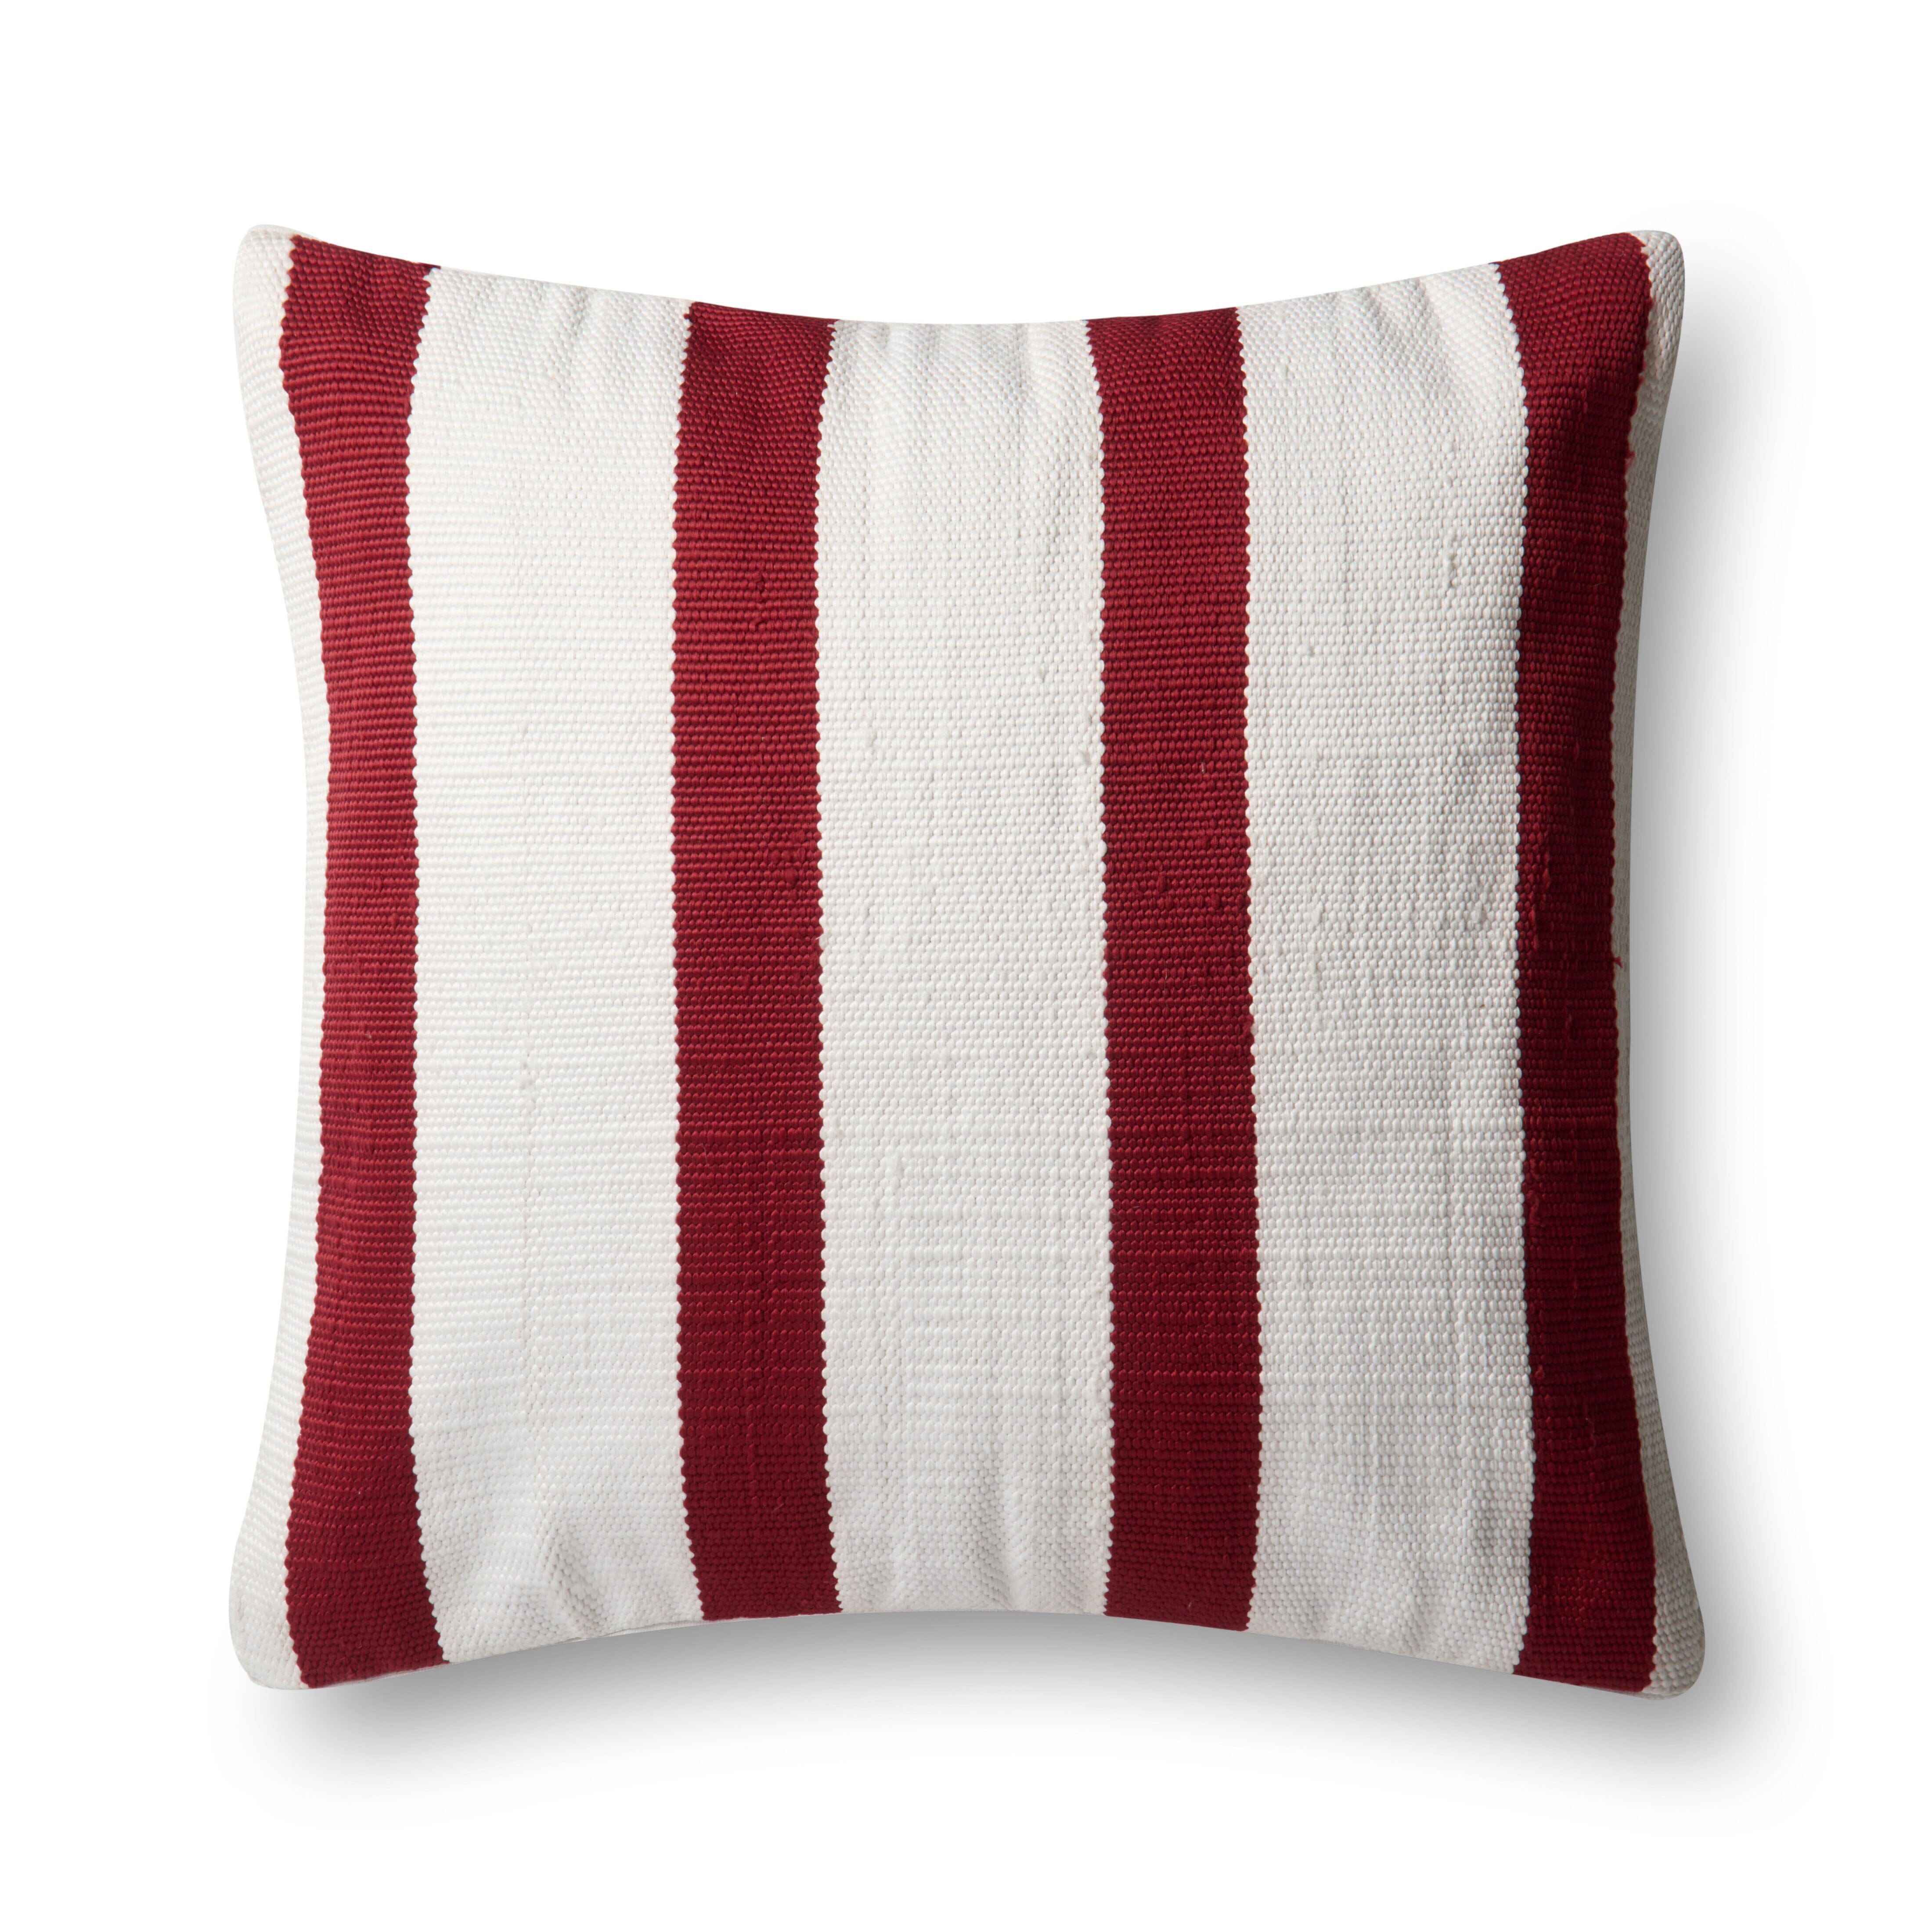 Loloi Pillow | Red / Ivory Loloi